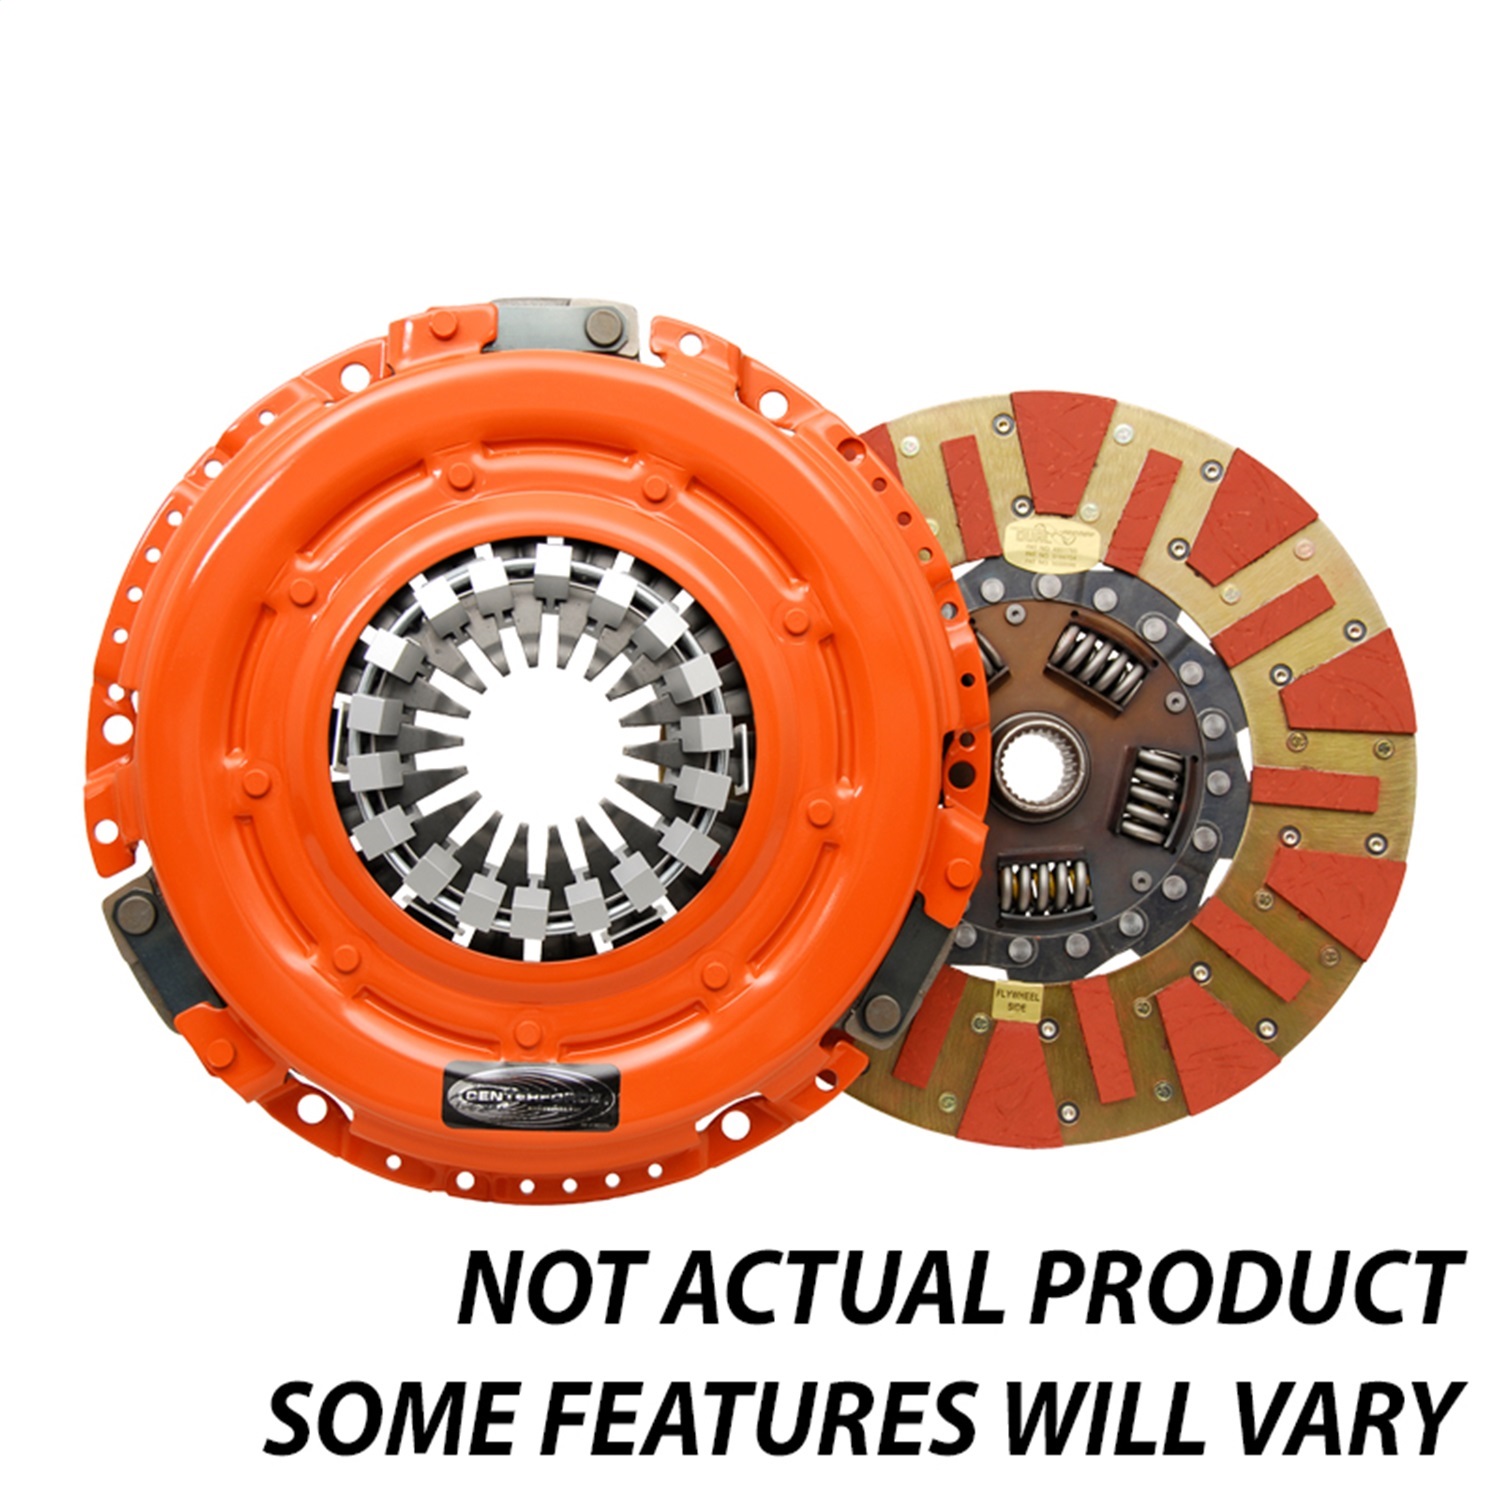 Centerforce Centerforce DF161830 Dual Friction Clutch Pressure Plate And Disc Set